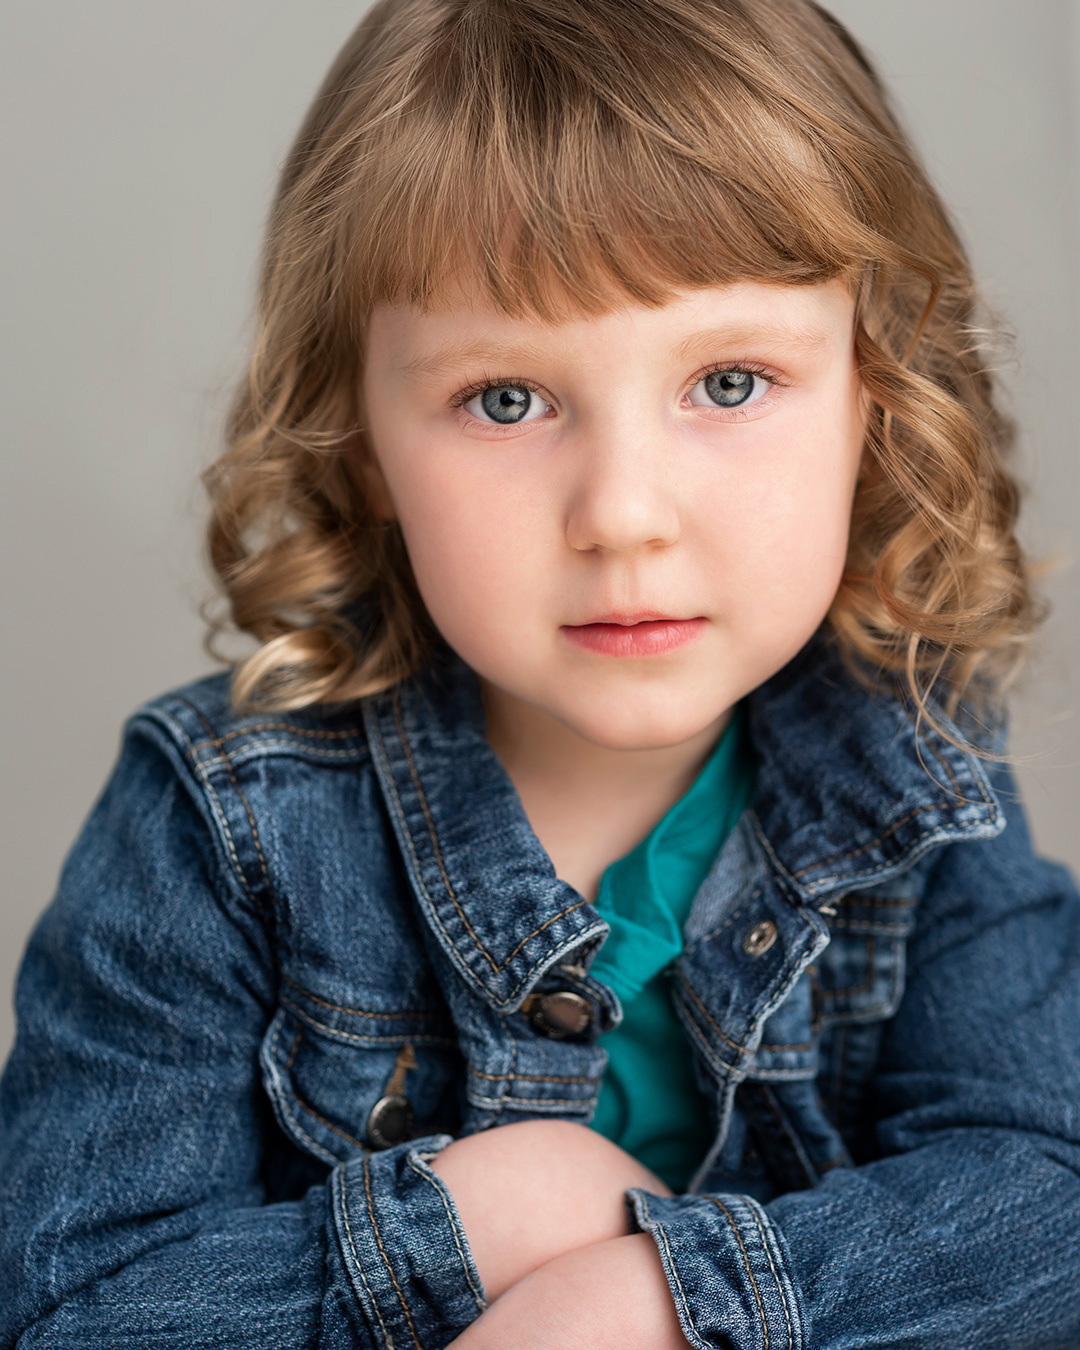 3 year old child actor headshot of Adelyn Bruce